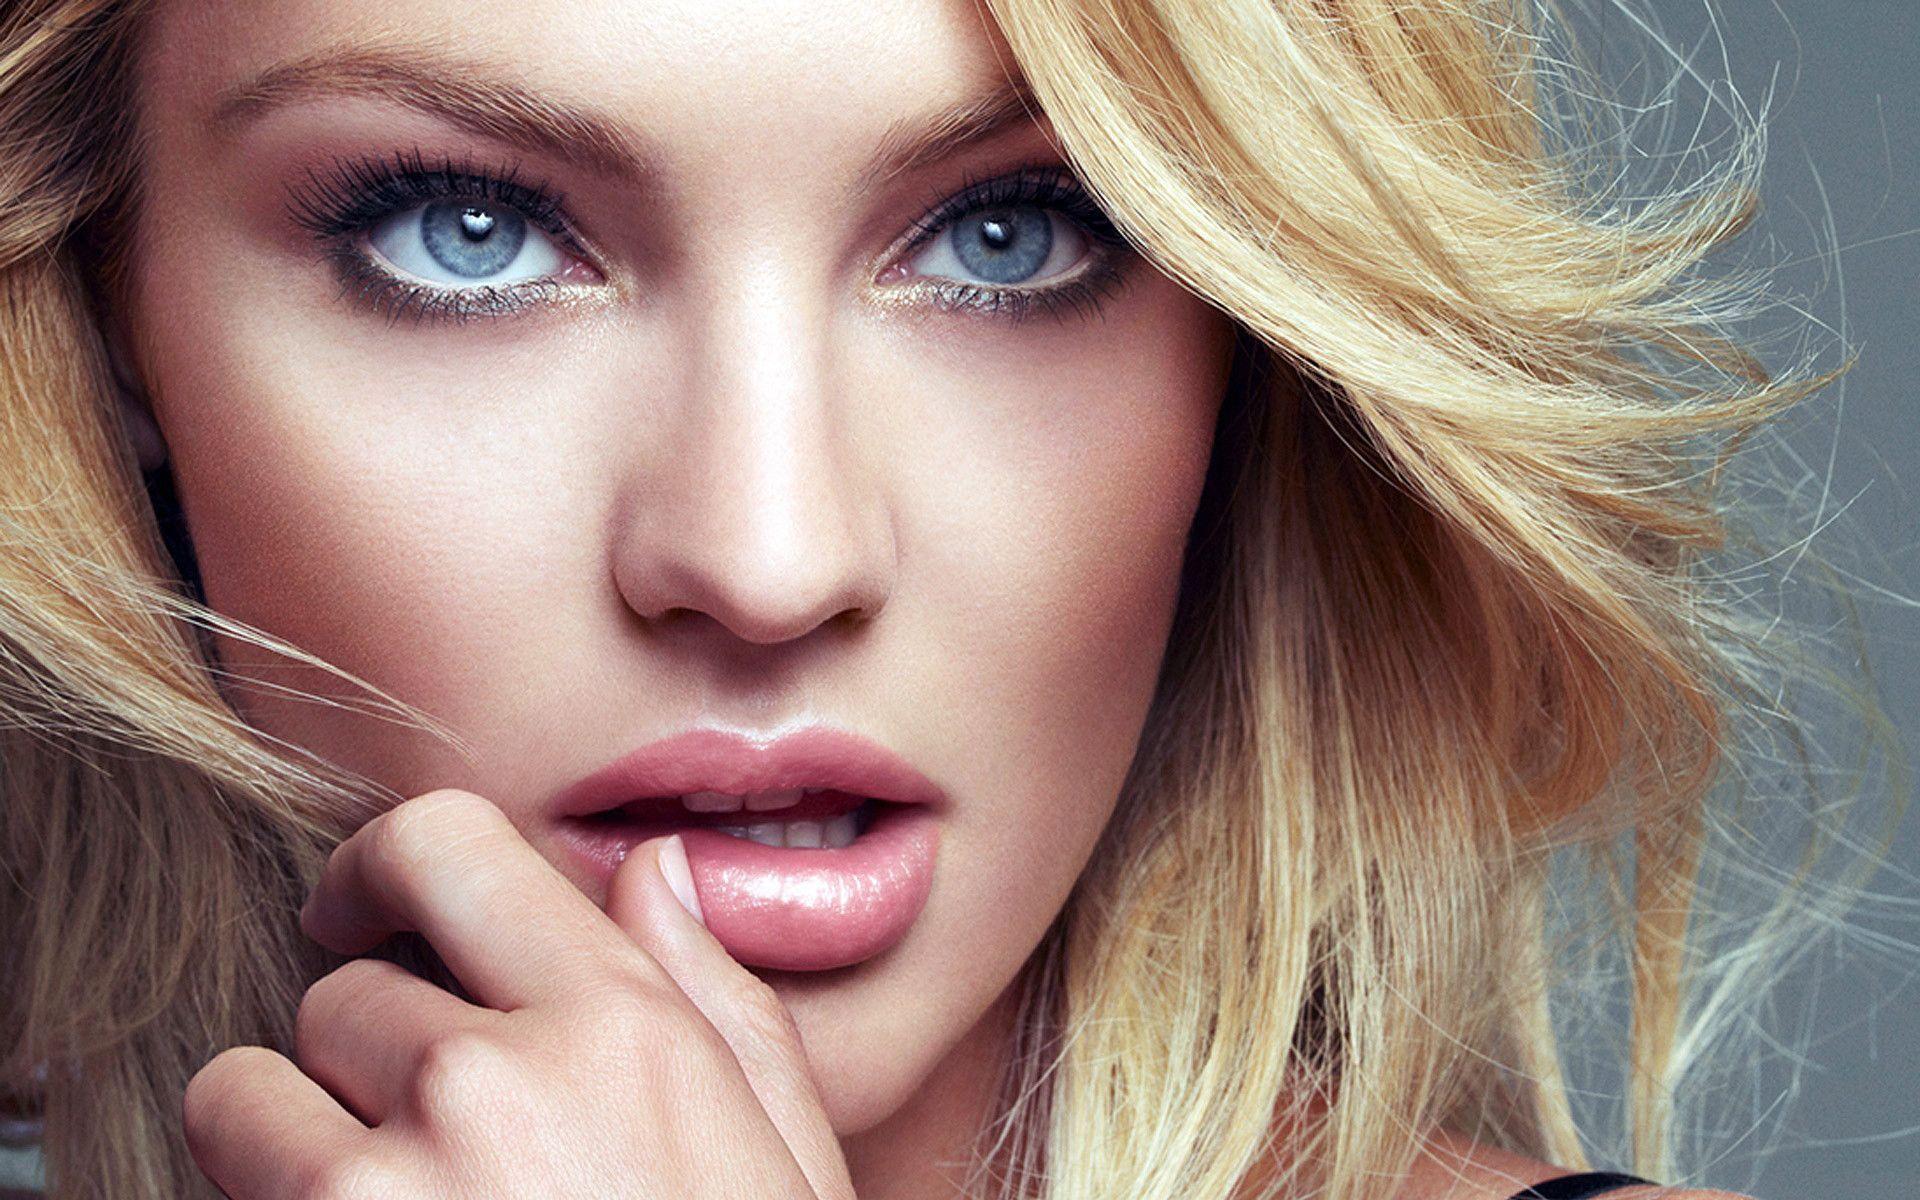 Candice Swanepoel Beautiful Face widescreen wallpapers.